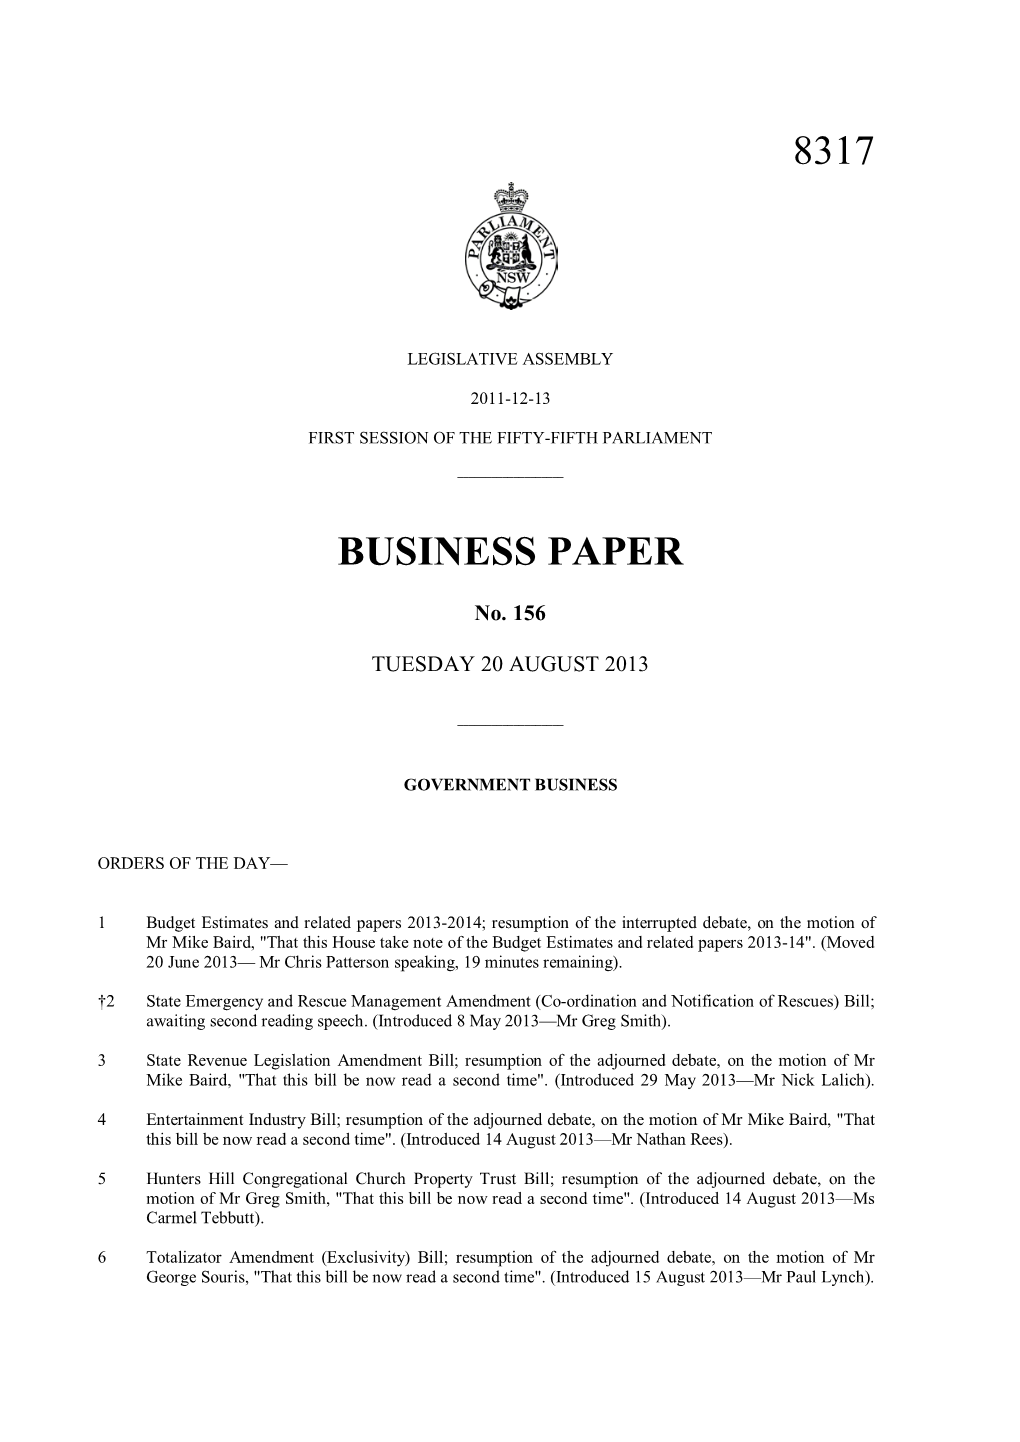 8317 Business Paper